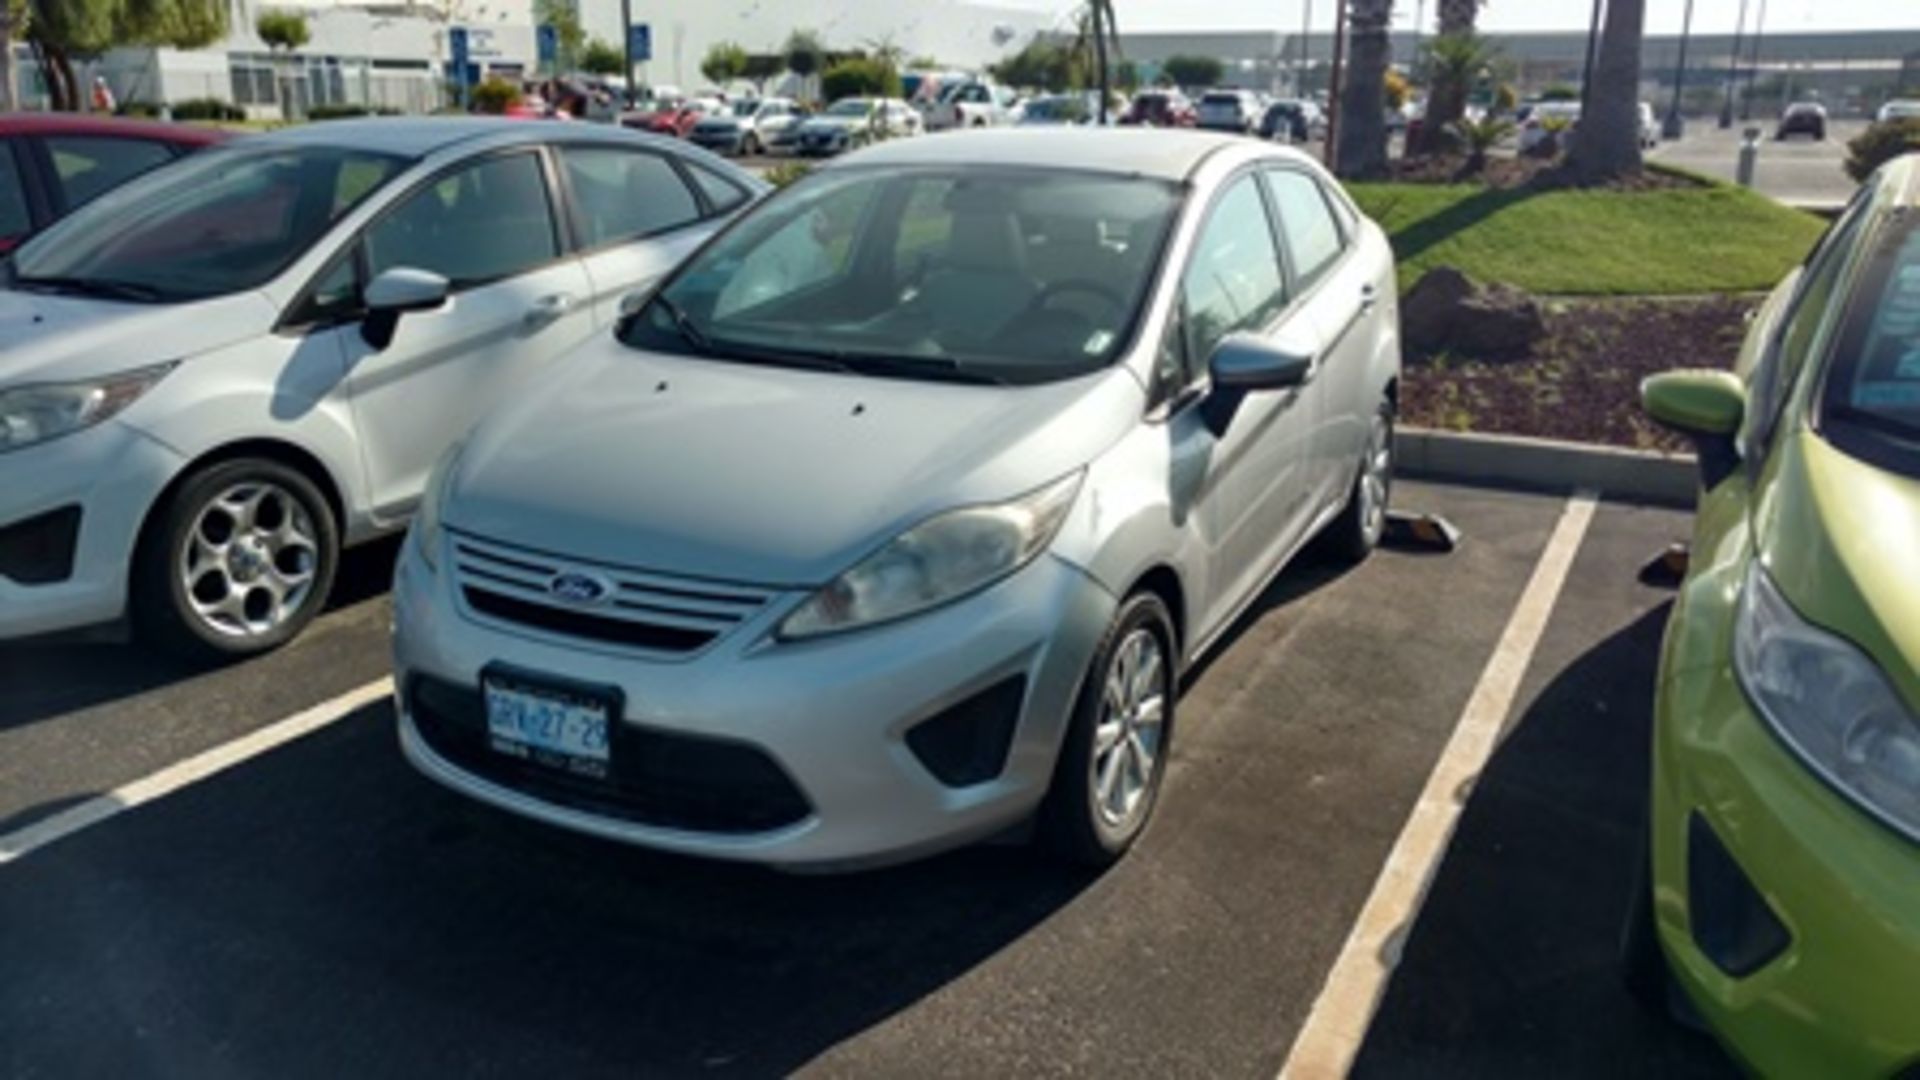 Ford Fiesta STA, model 2011 Series 3FAKP4AJXBM150559 with 152,652 Km… - Image 7 of 13